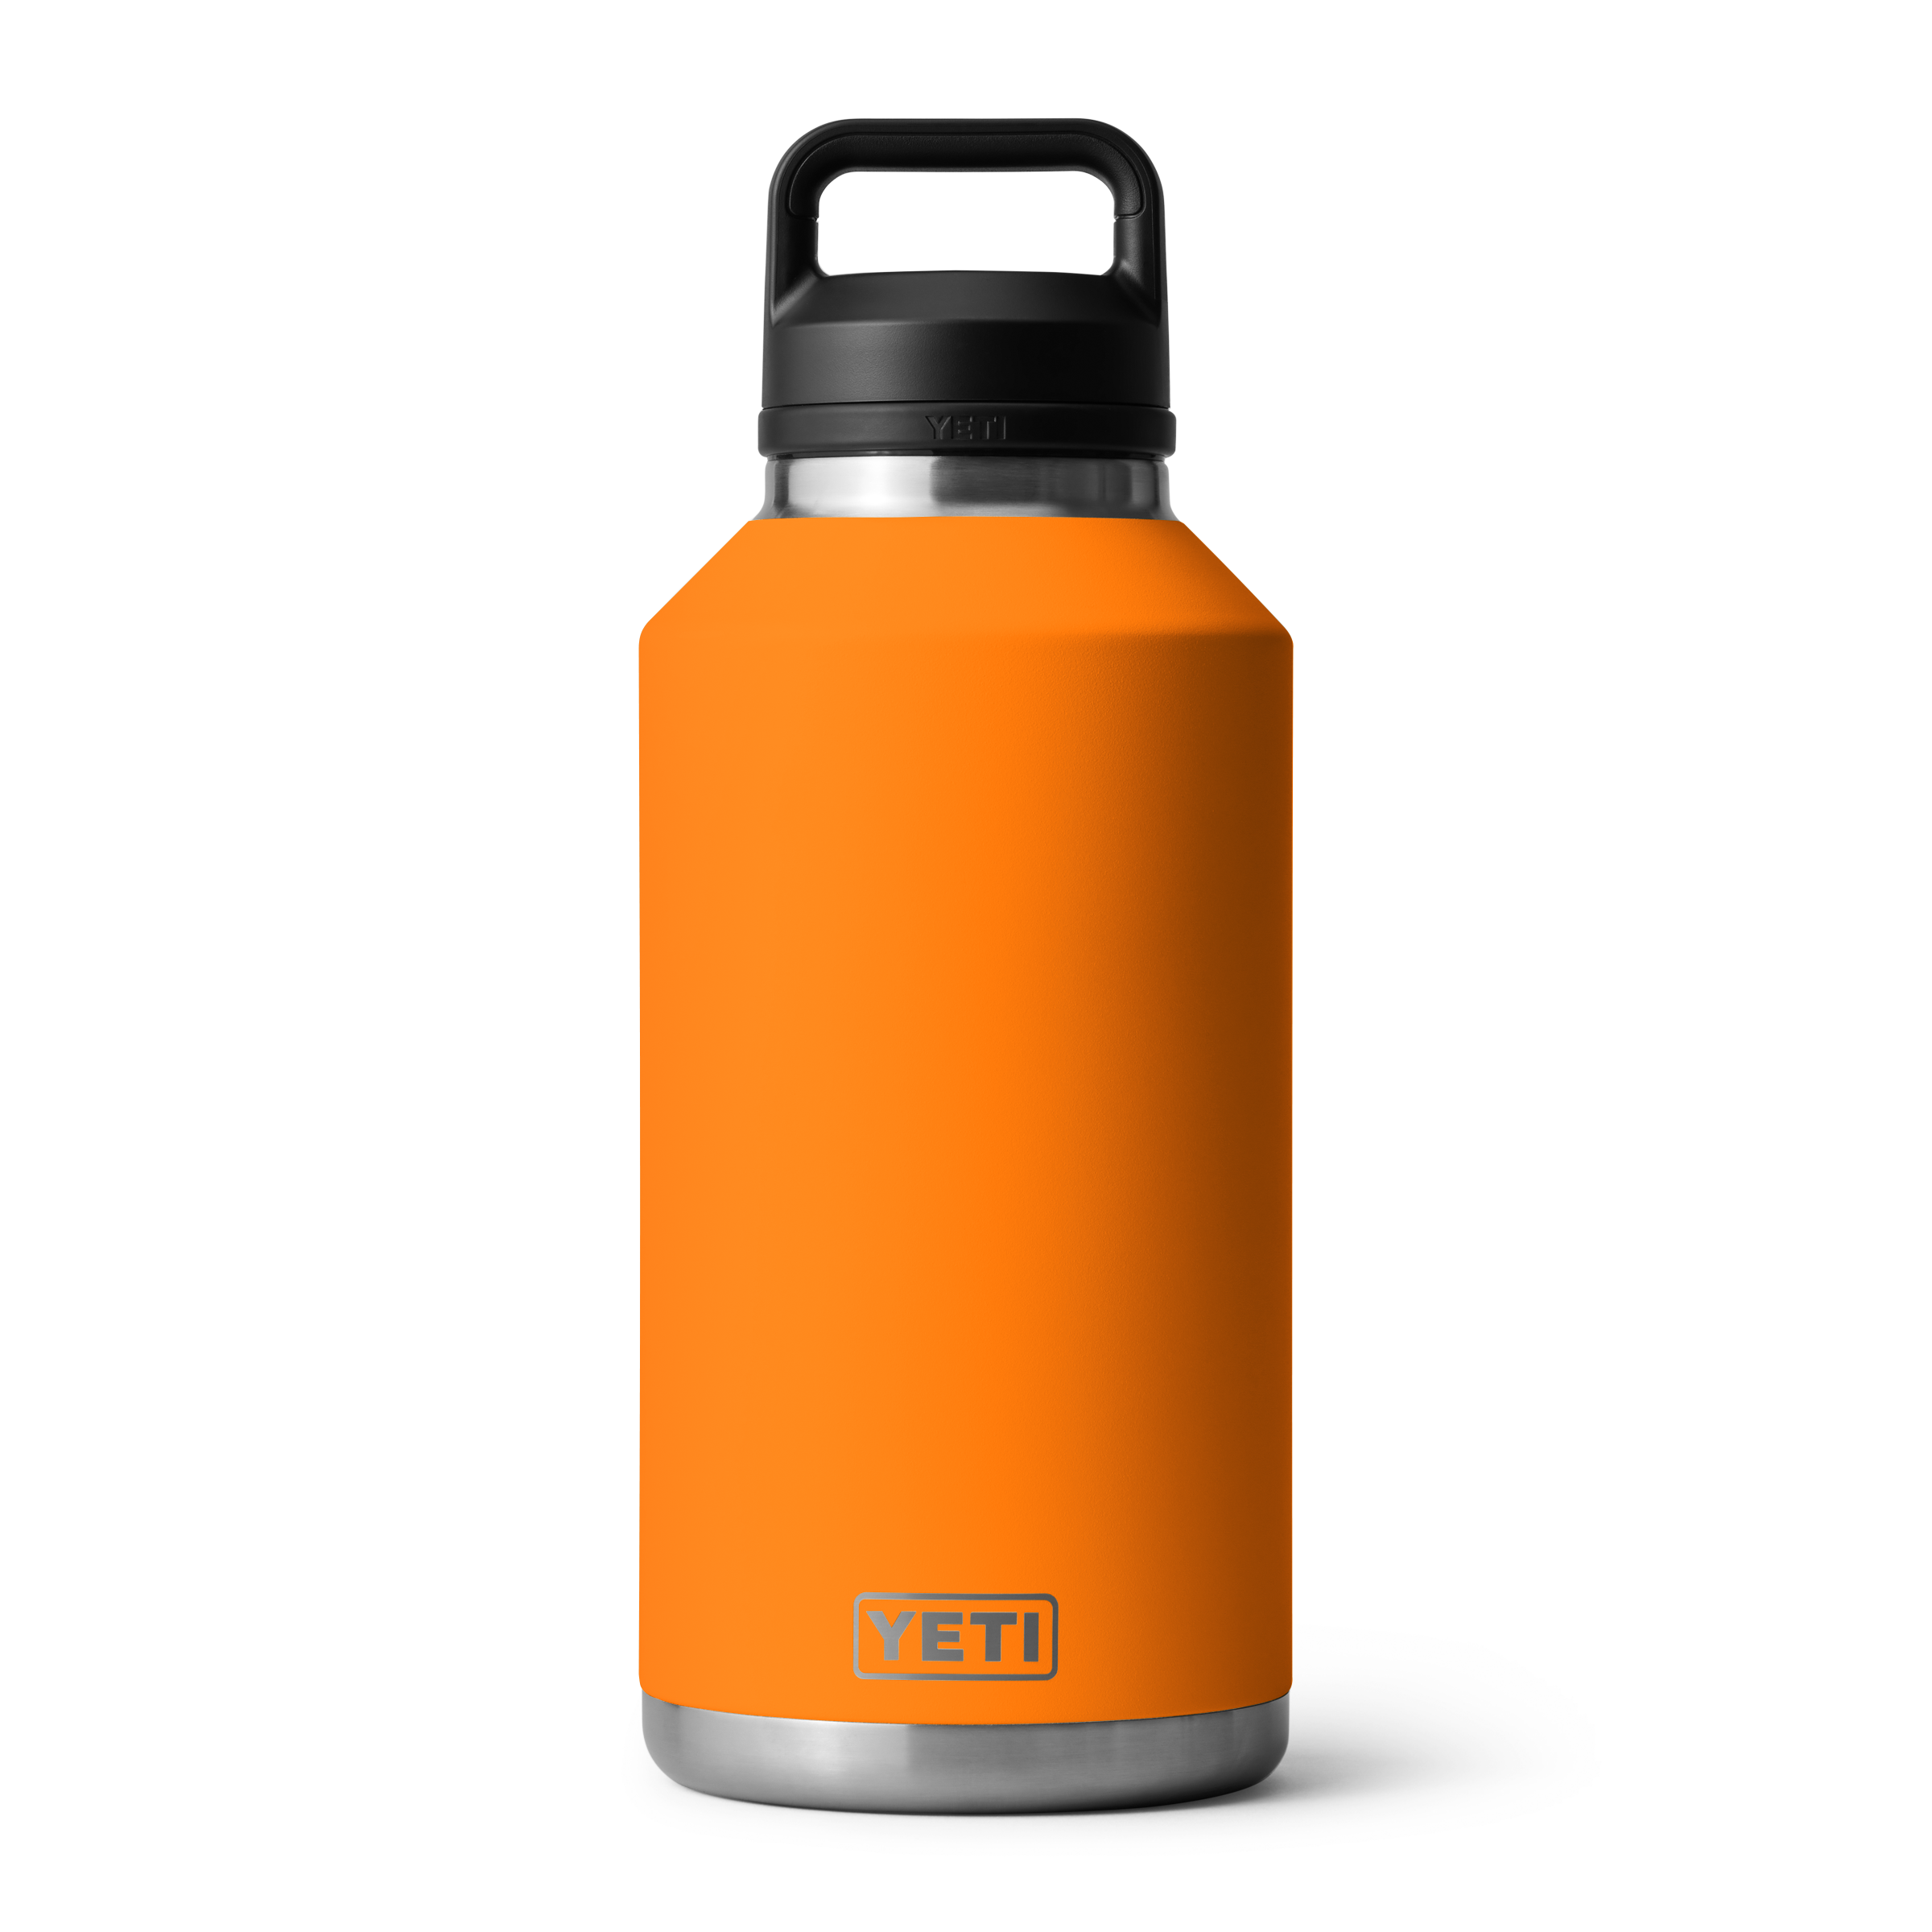 Drink bottle, orange bottle, keeps cold drinks cold, 100% leak proof, easy to carry, double vacuum insulated, yeti